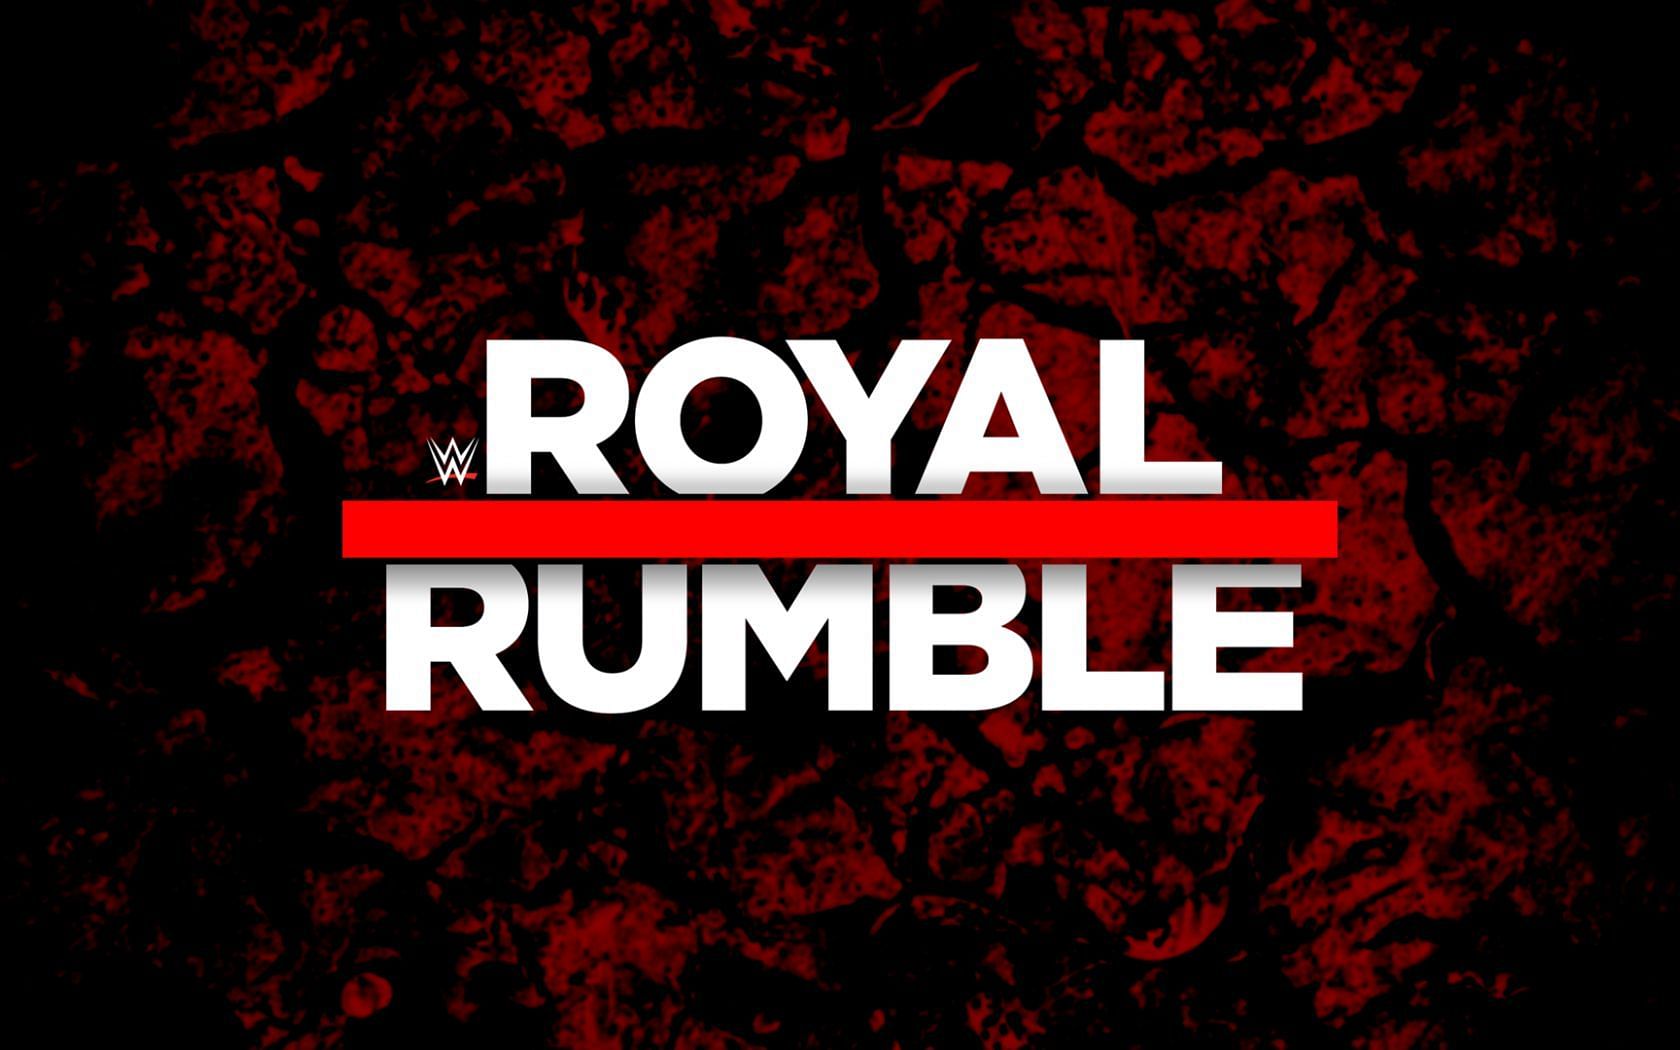 The 2023 Royal Rumble is the upcoming 36th annual Royal Rumble